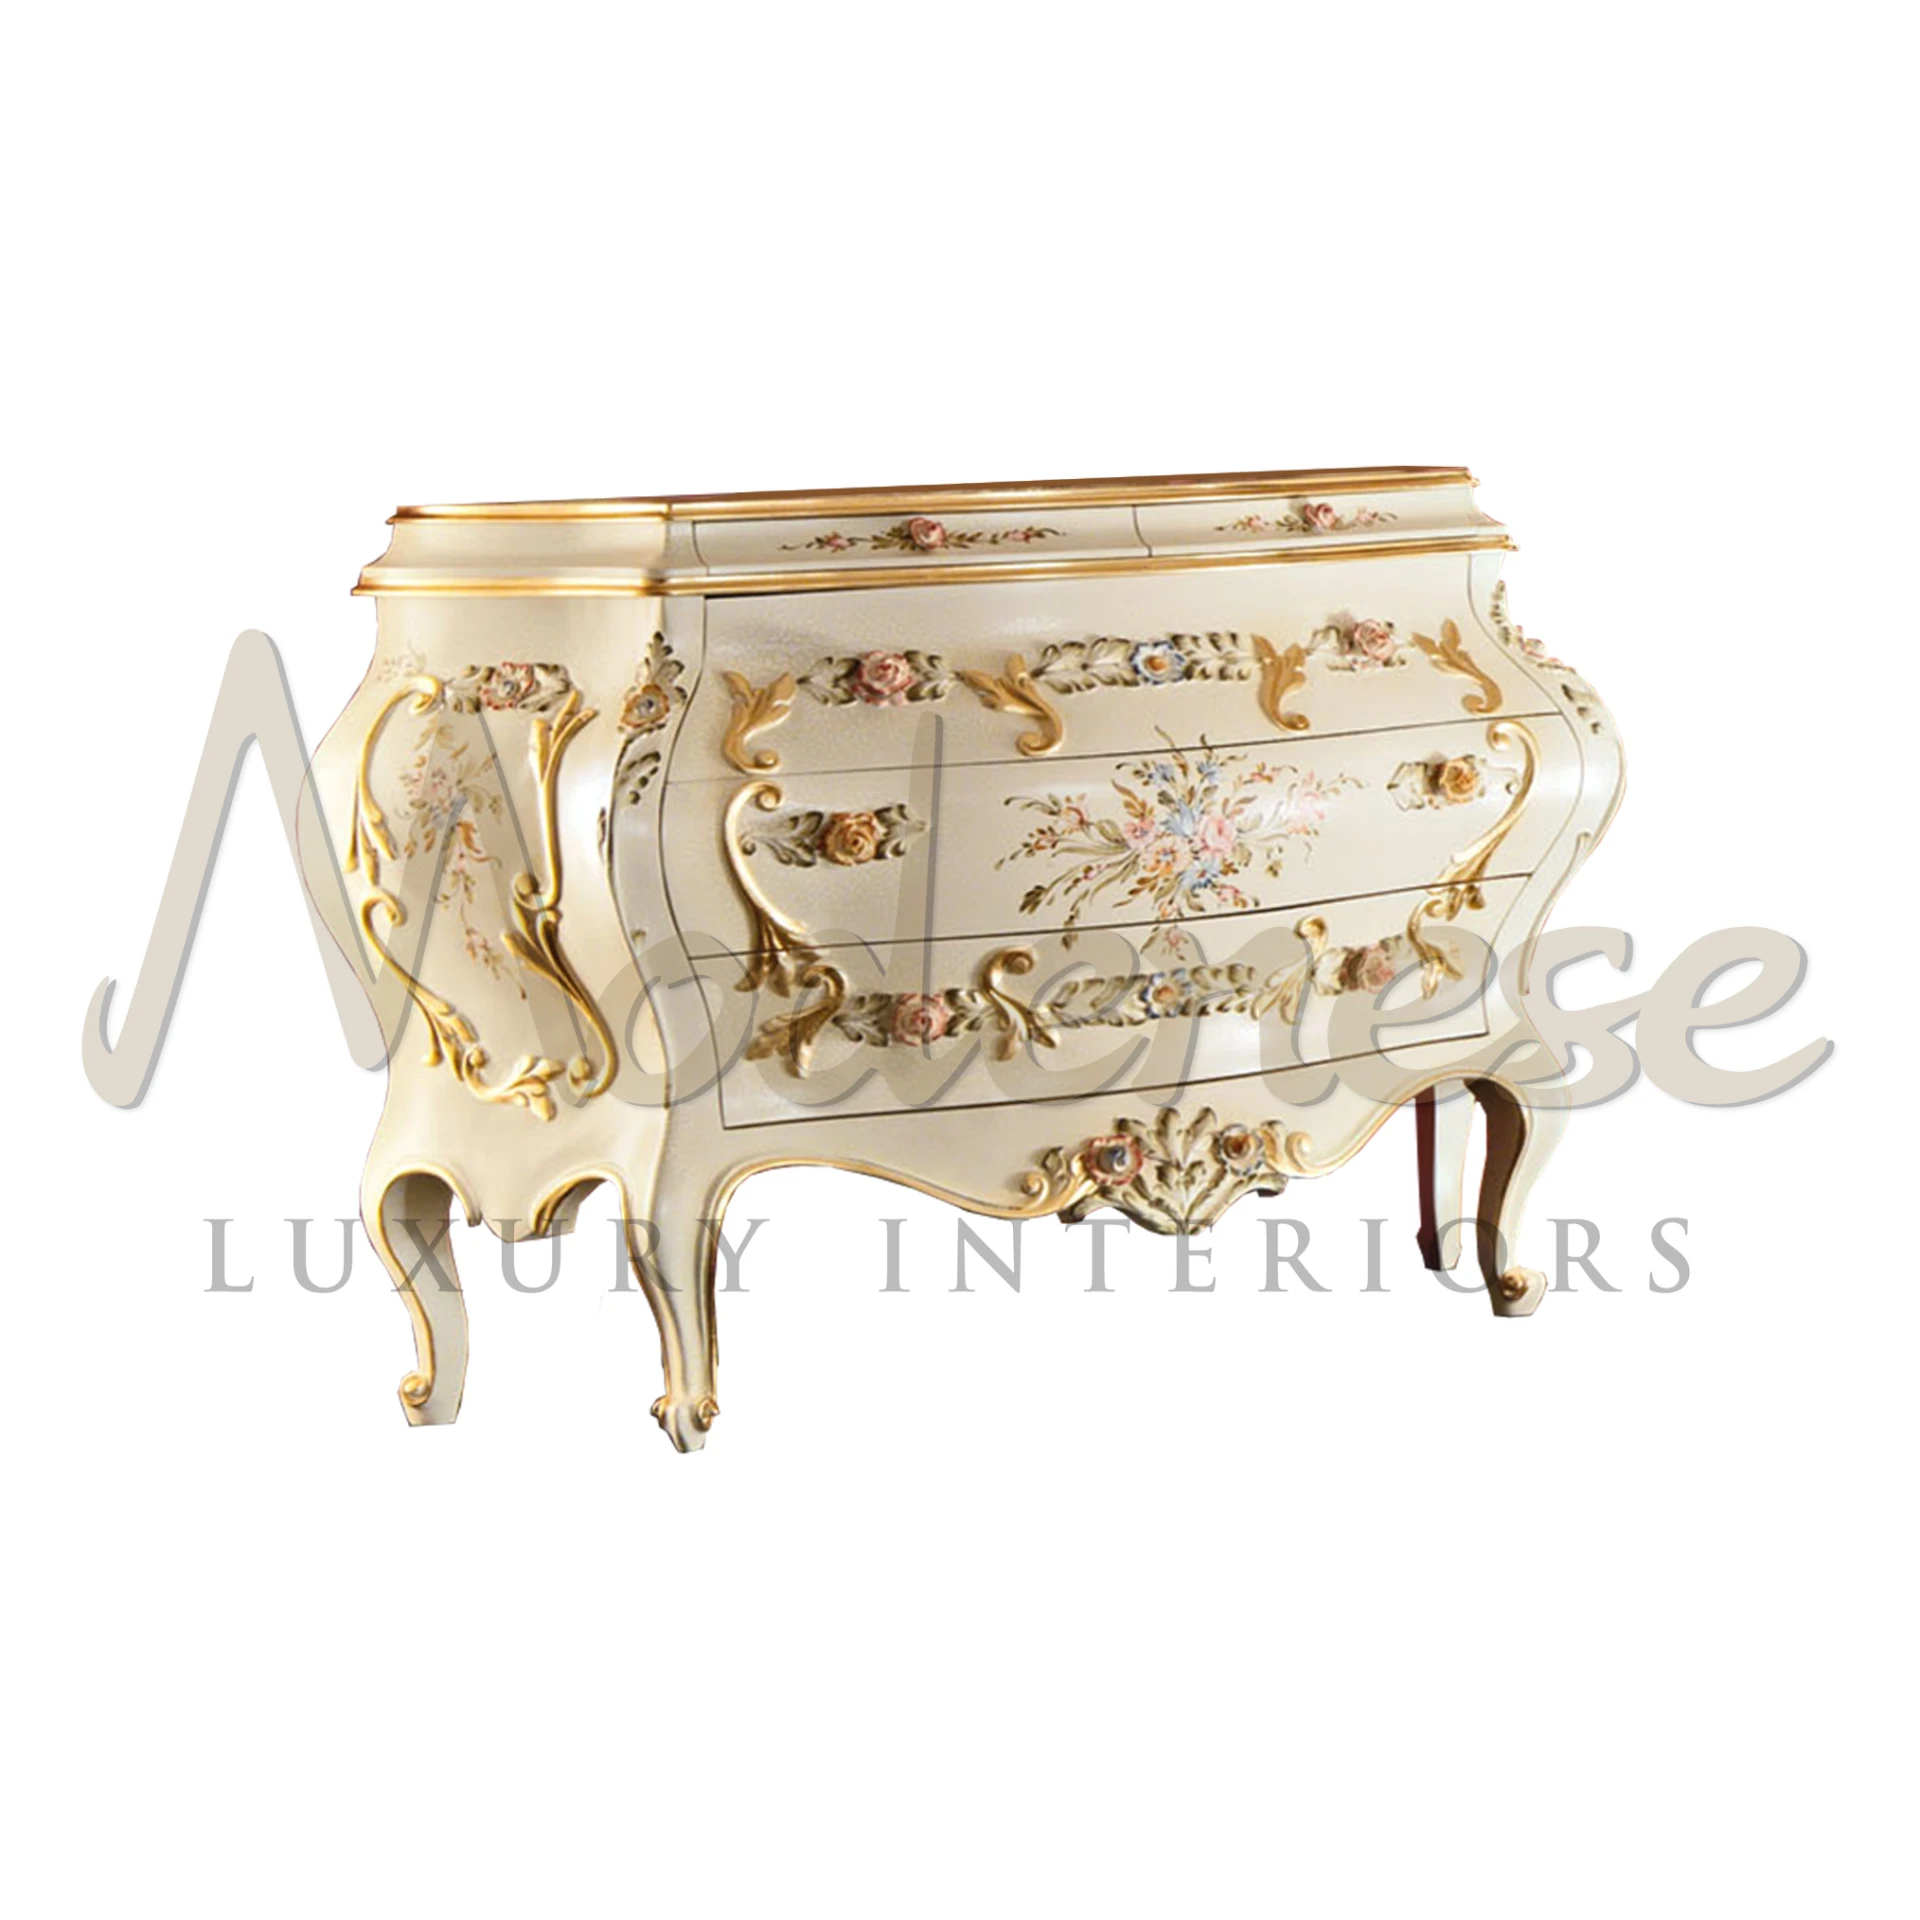 Ivory and gold French Rococo chest of drawers with hand-painted floral designs.                                                                                              